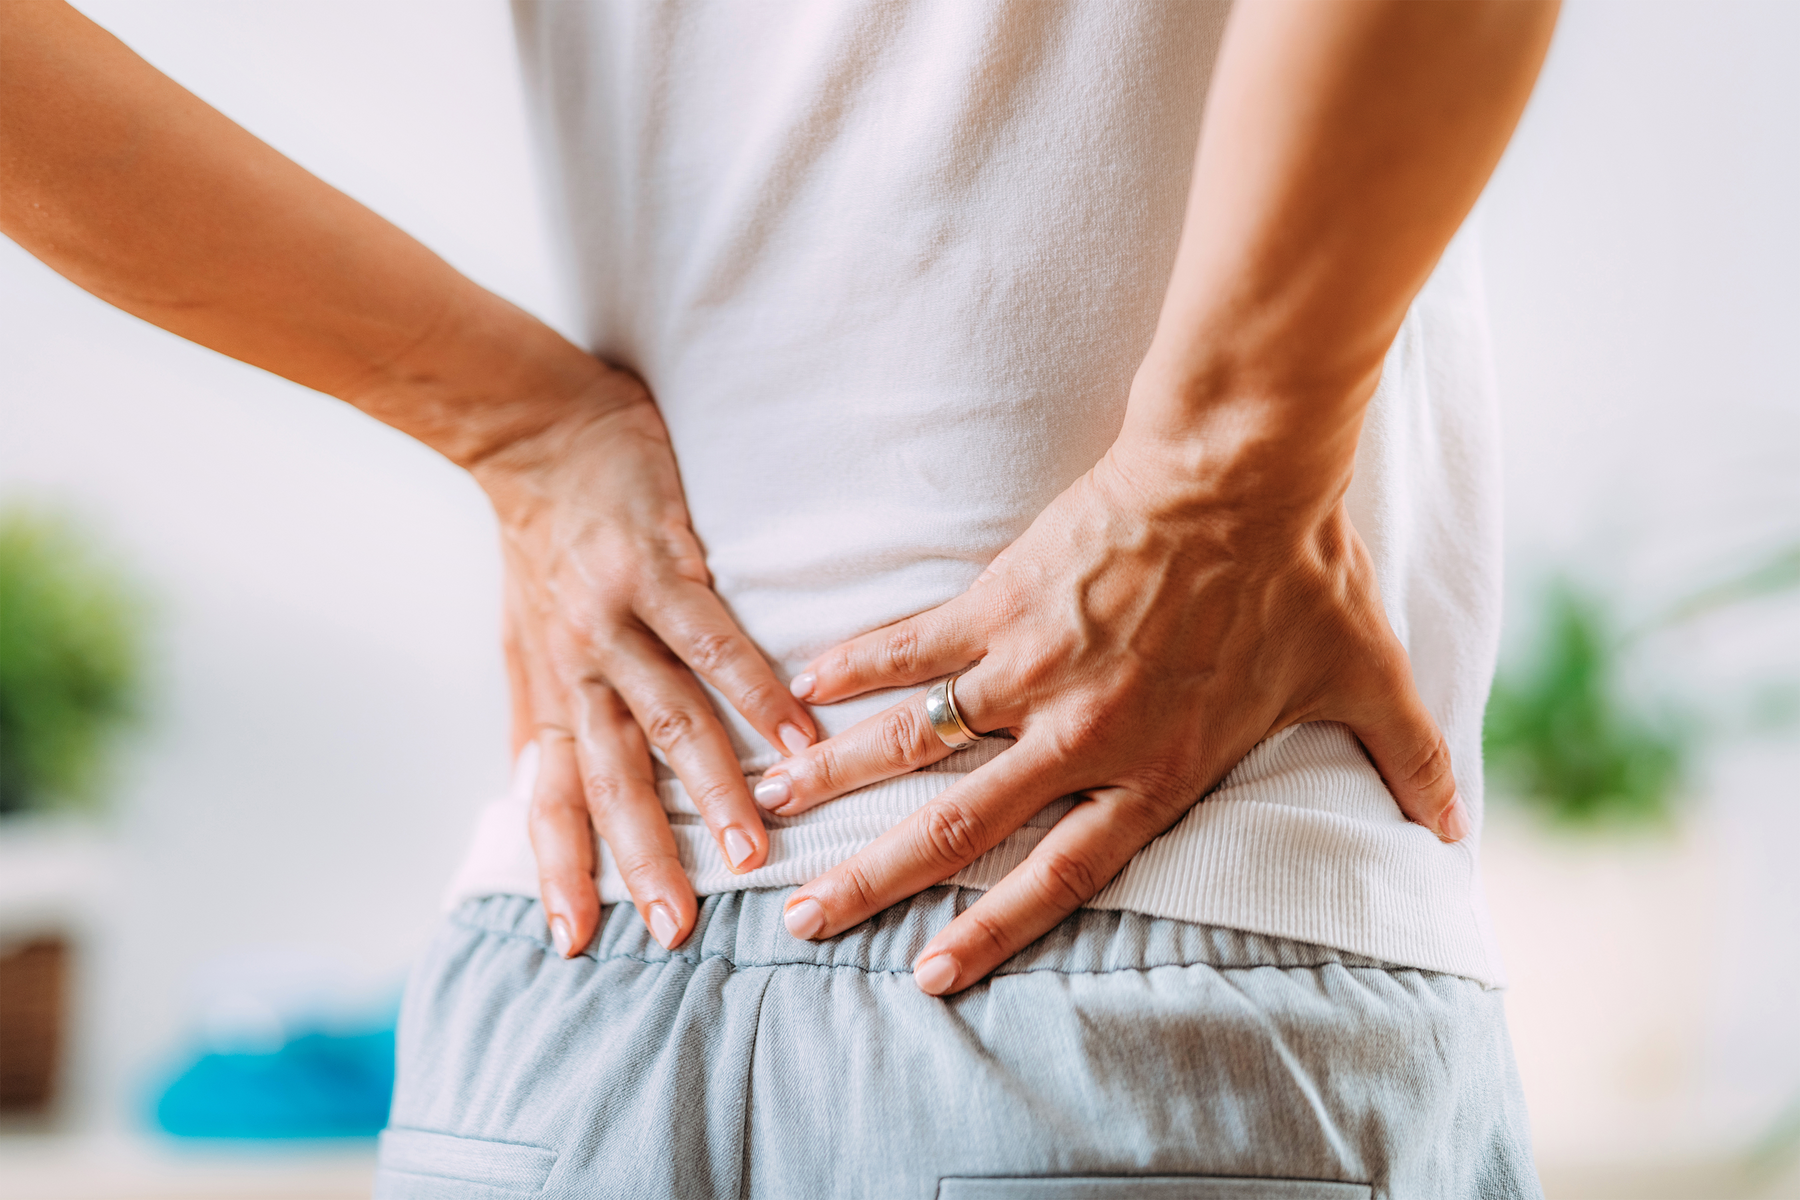 A Complete Guide for Relieving Sciatica Pain with a TENS Unit